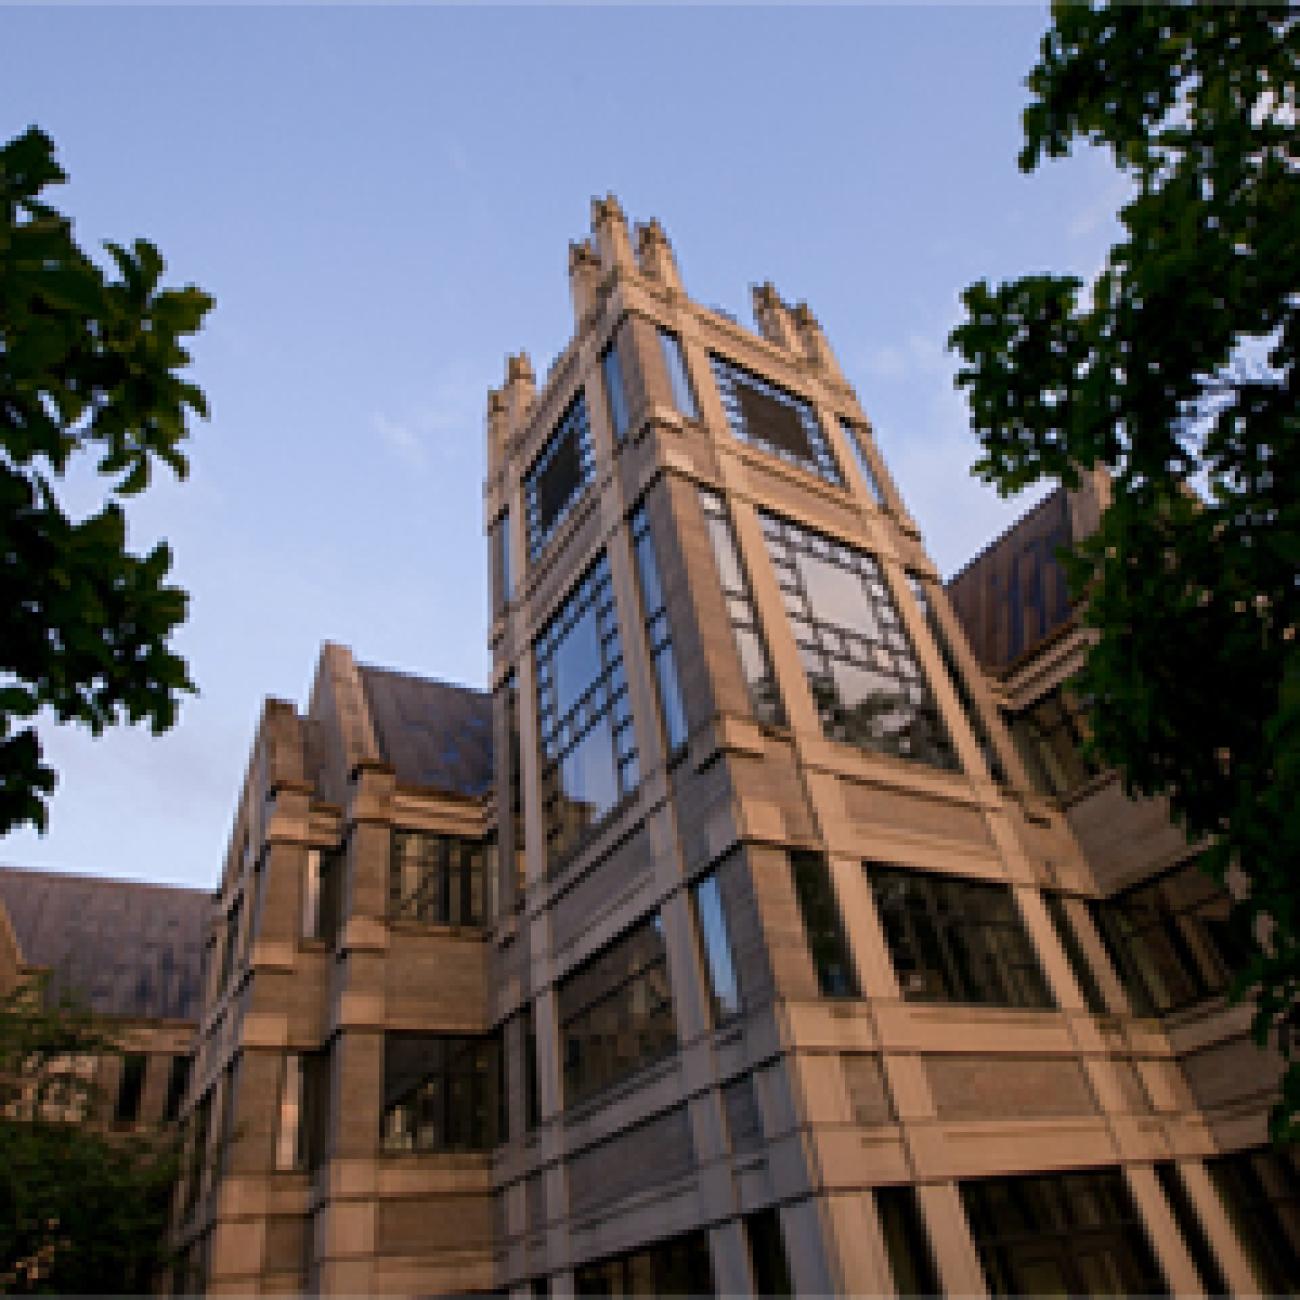 An external view of the Sanford School of Public Policy